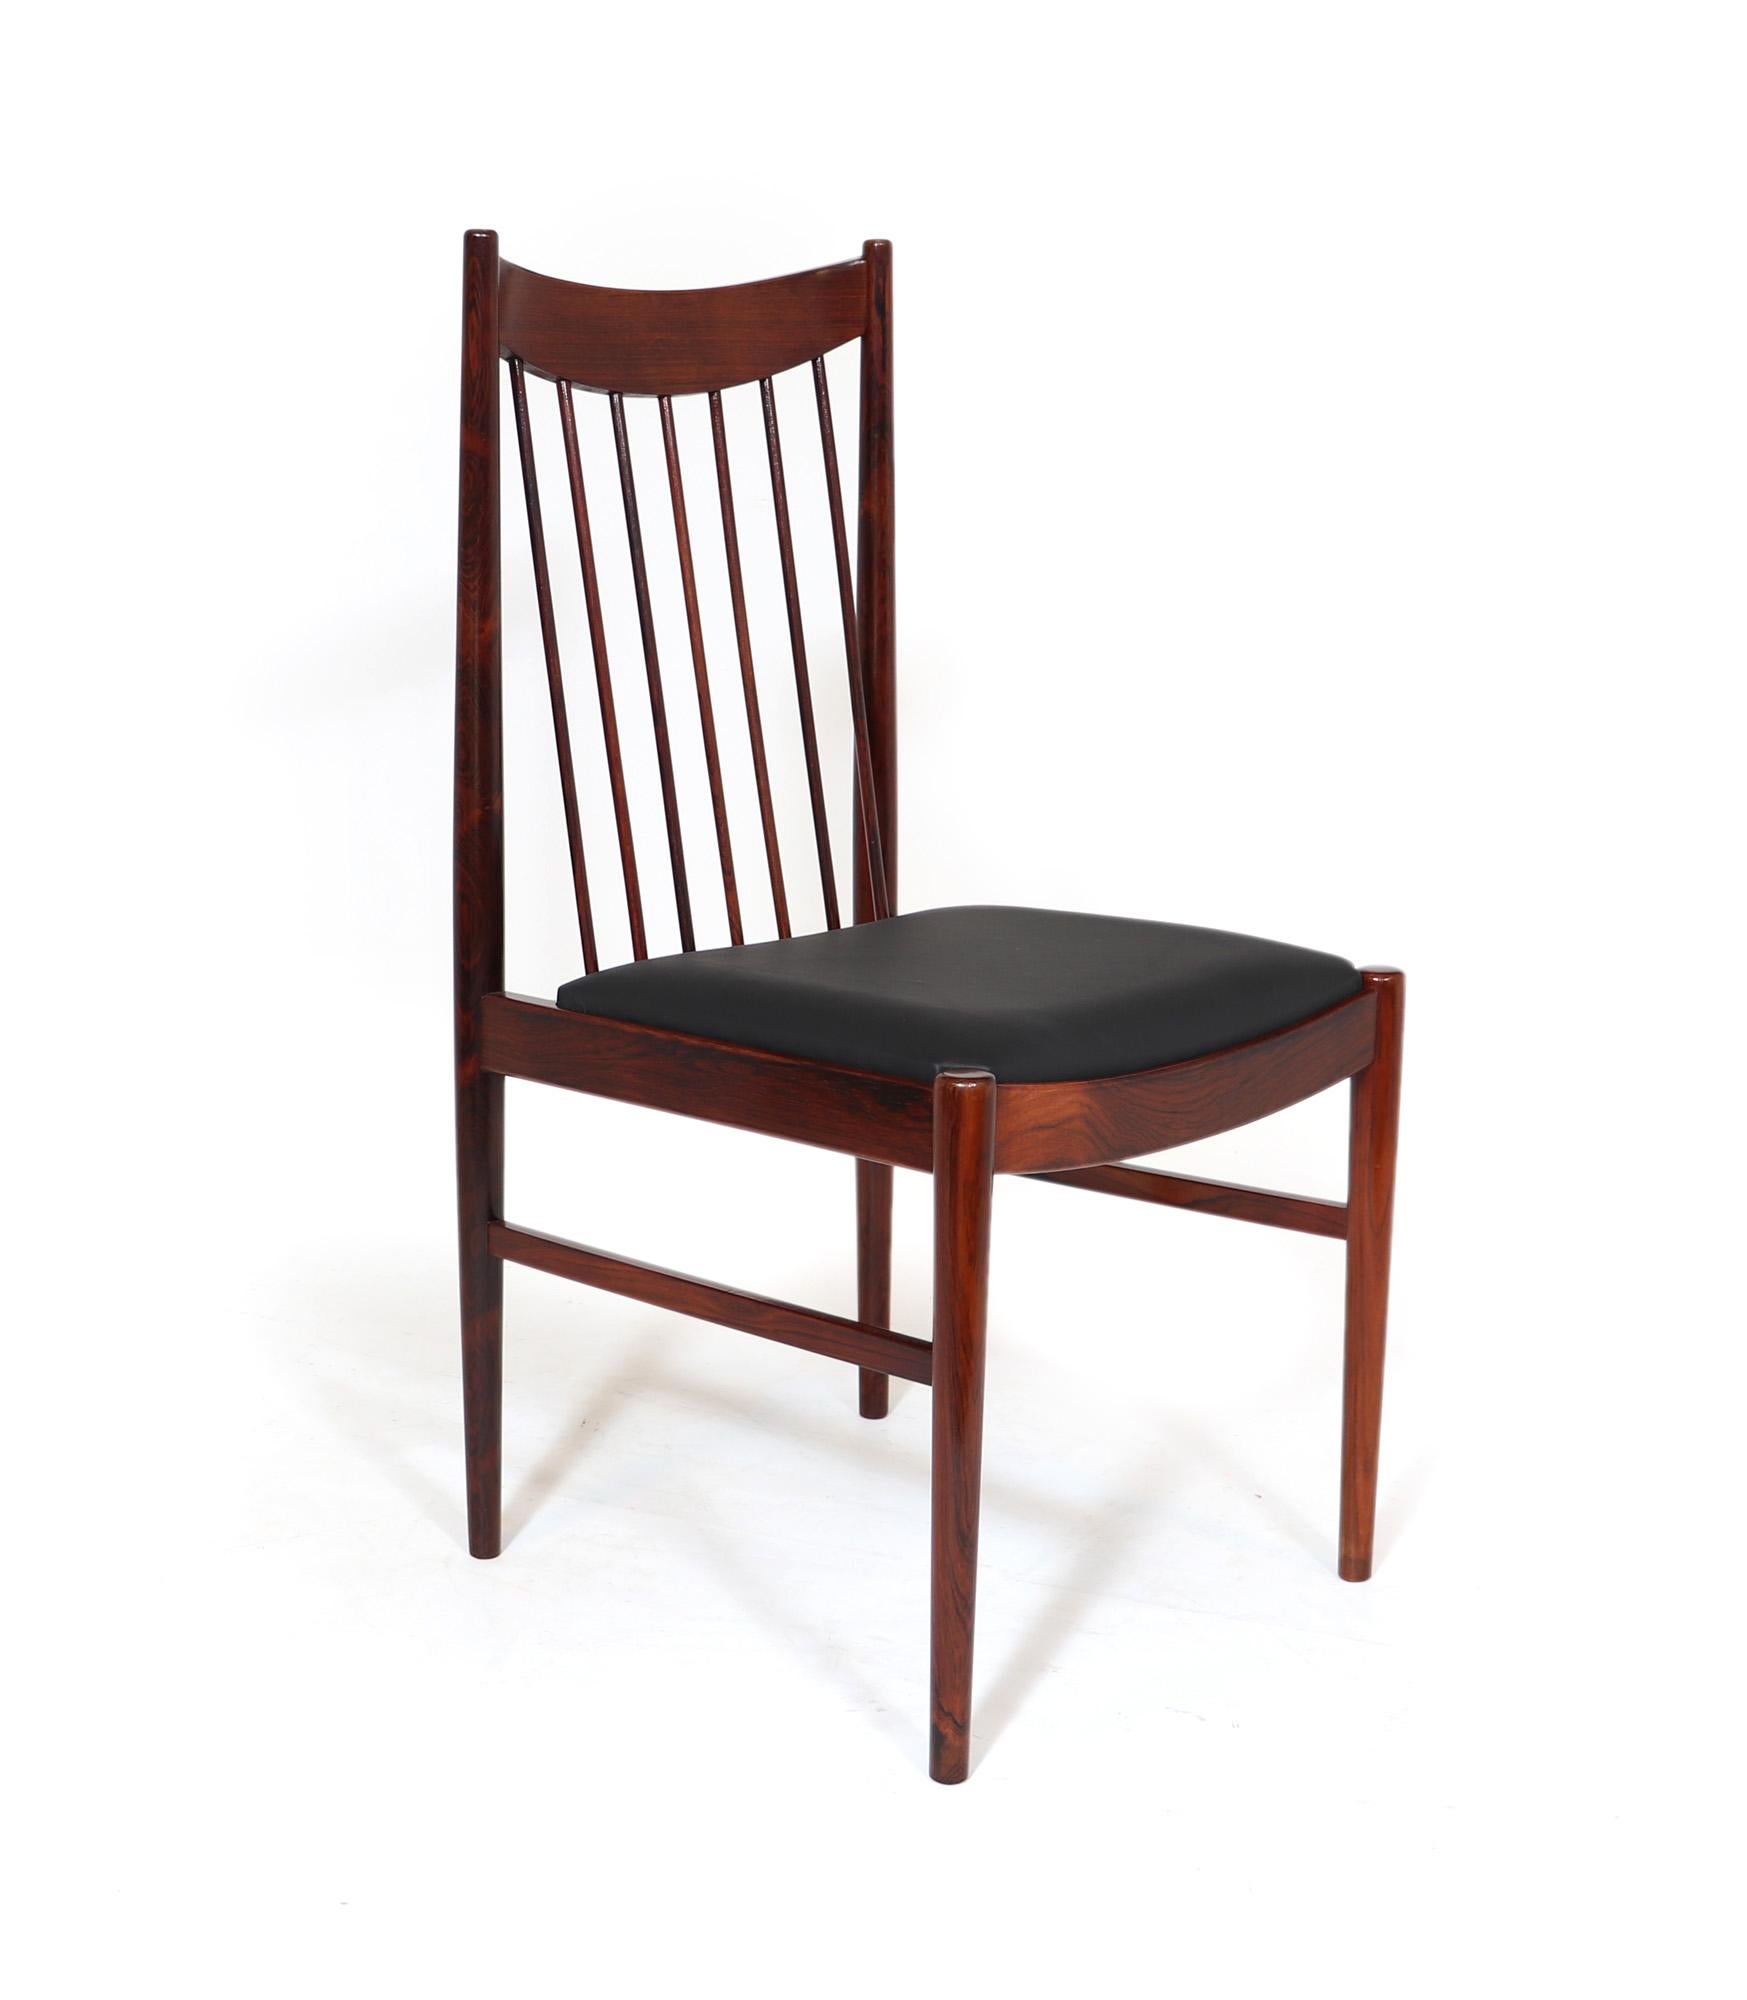 A set of four model 442 dining chairs designed by Arne Vodder and produced by Sibast in Denmark in the early 1960s the frame is partly solid rosewood and have newly upholstered black leather seat covers, the chairs have been fully polished and are